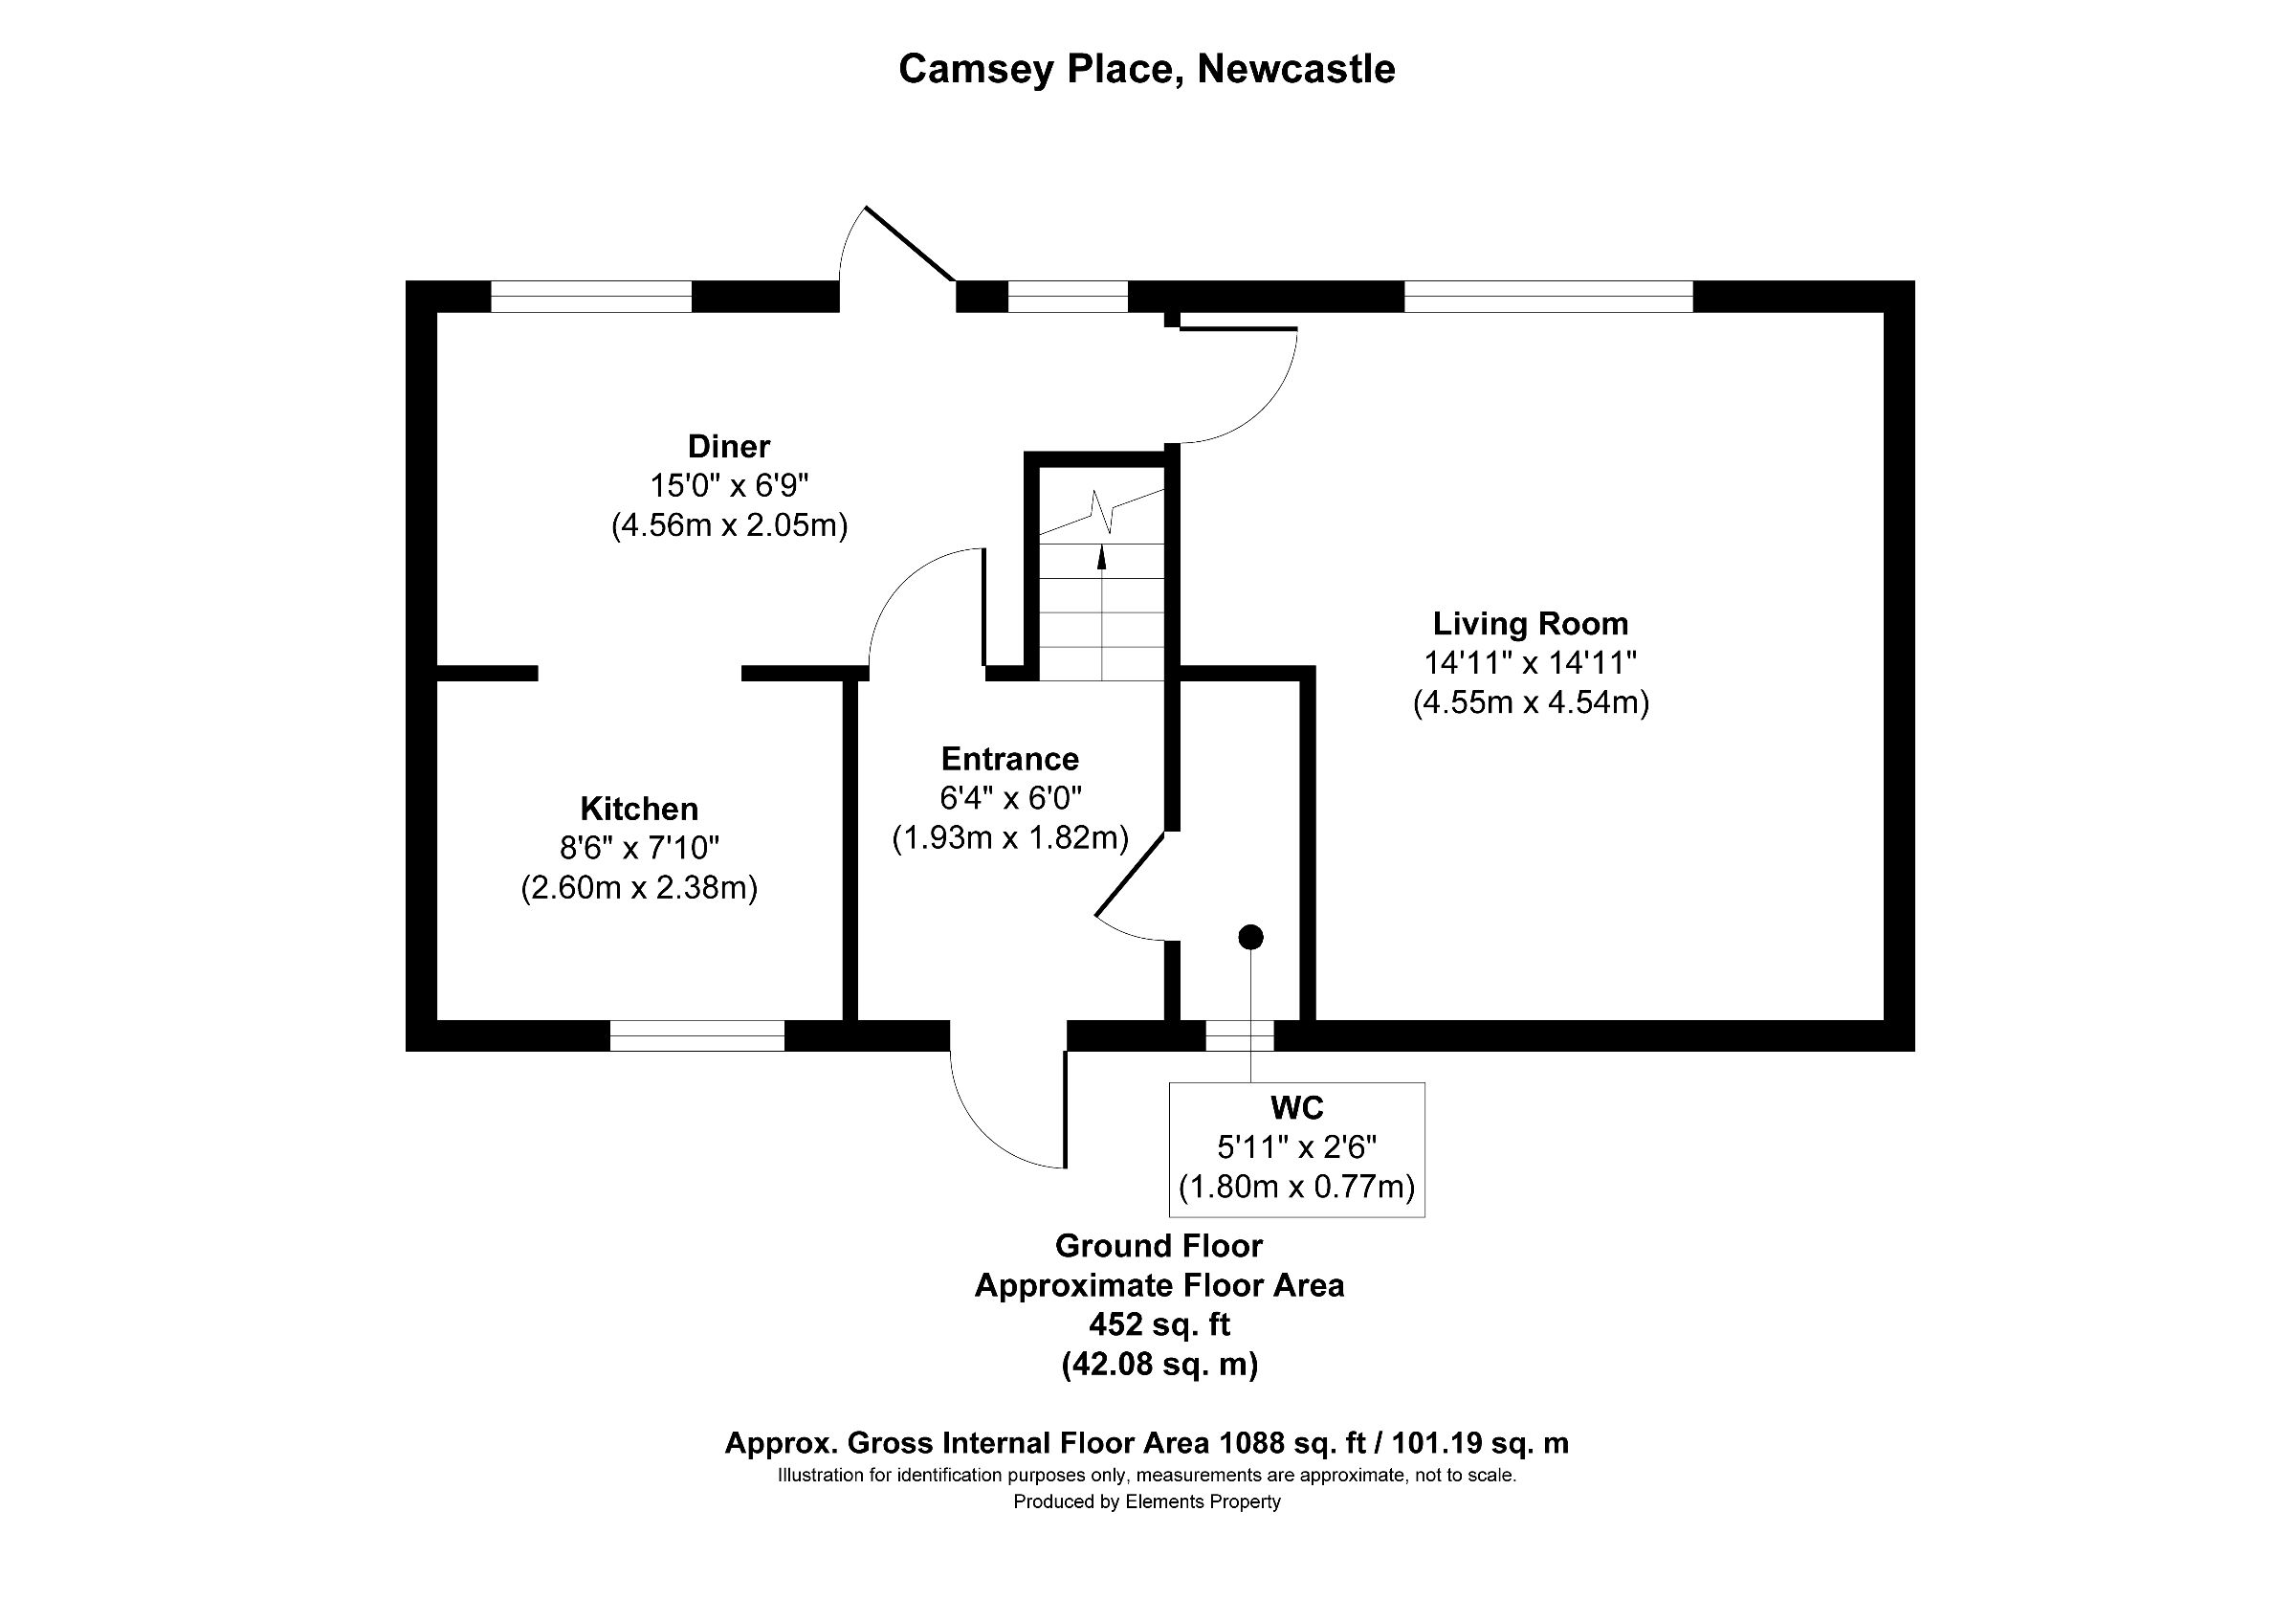 3 bed terraced house for sale in Camsey Place, Newcastle upon Tyne - Property floorplan